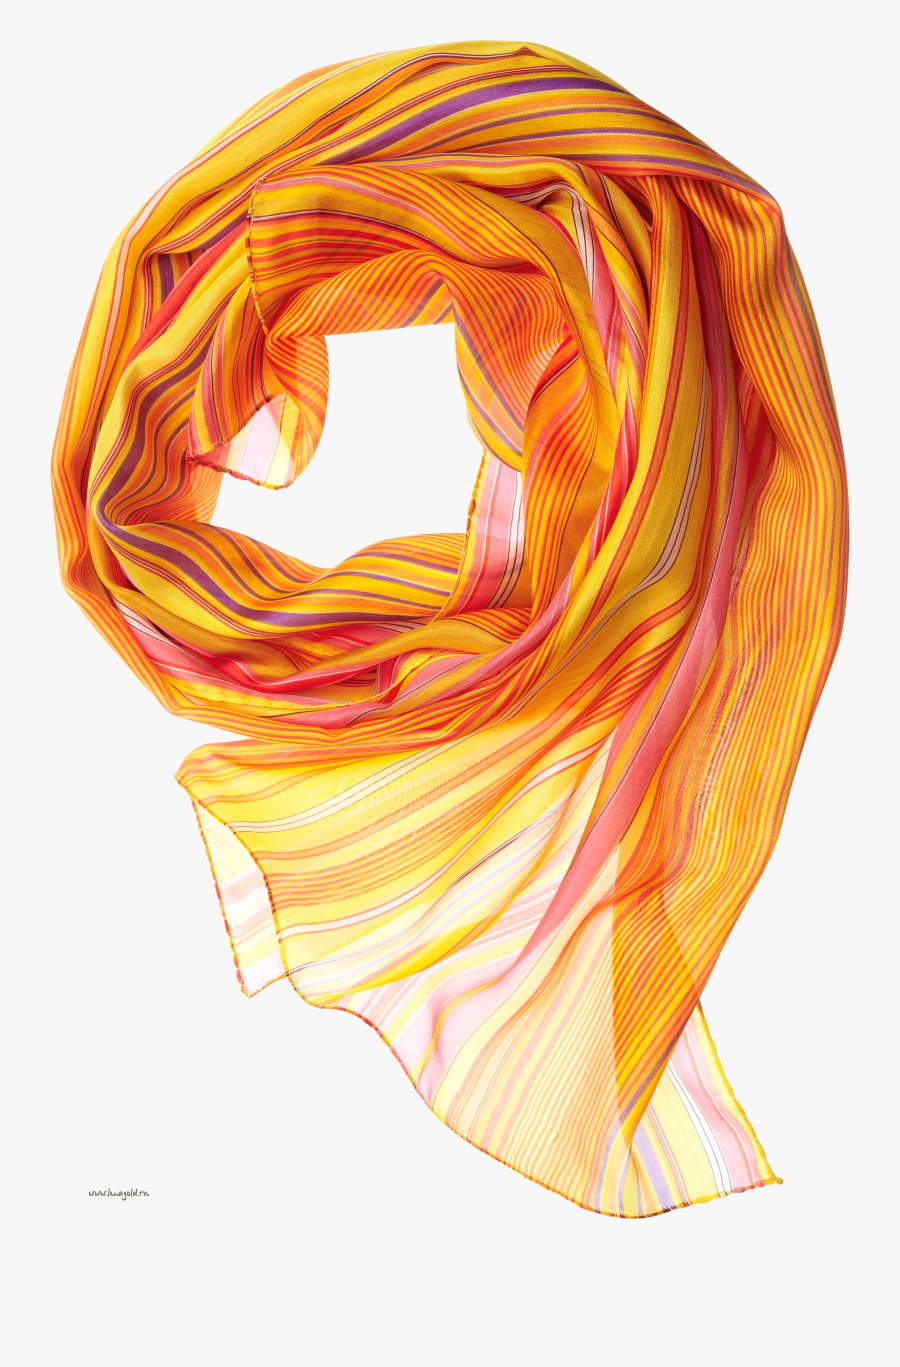 Scarf Png Image, Transparent Clipart